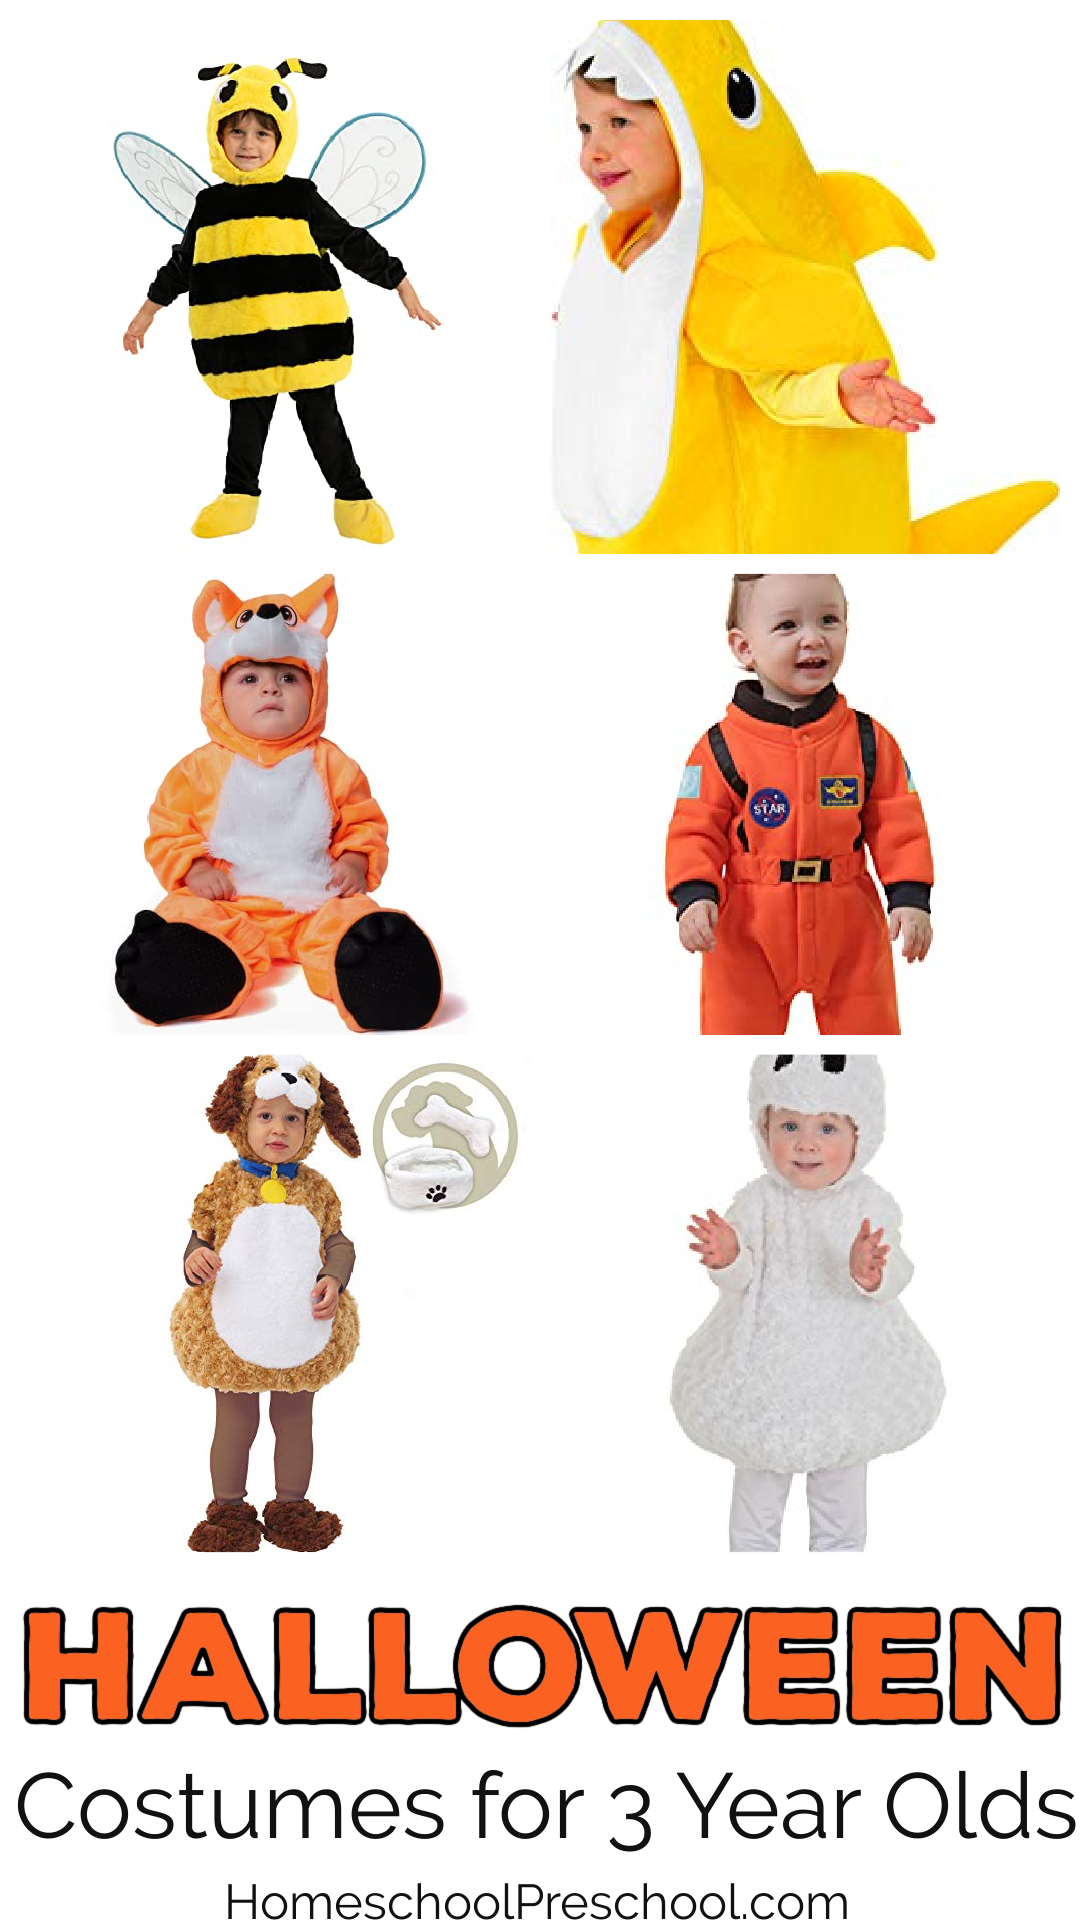 Halloween-costumes-for-3-year-olds-3 Halloween Costumes for 3 Year Old